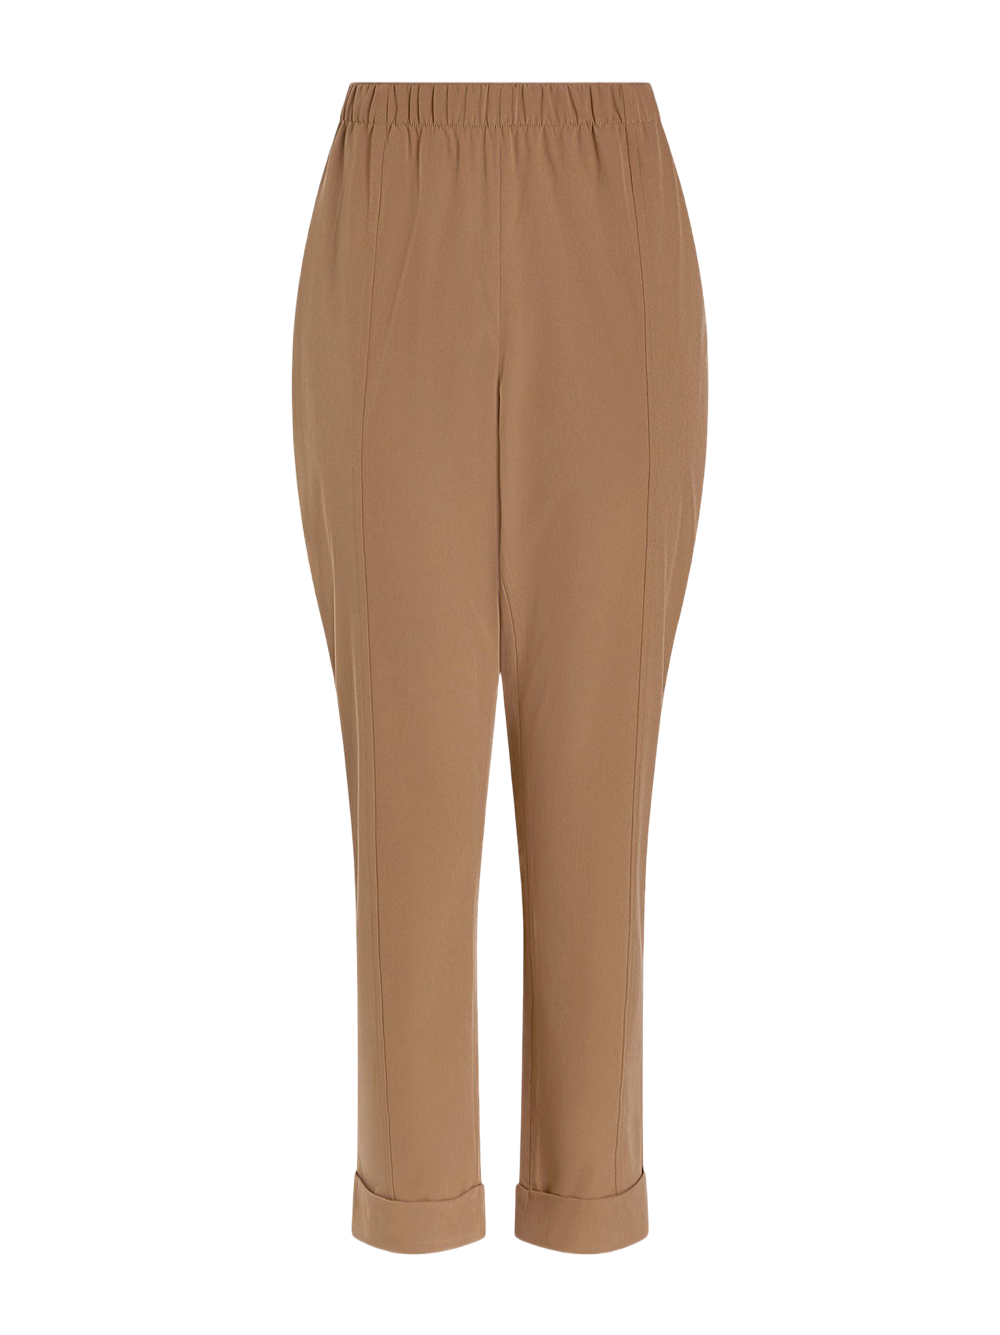 Varley Everly Turnup Taper Pant 27.5 in Taupe Stone